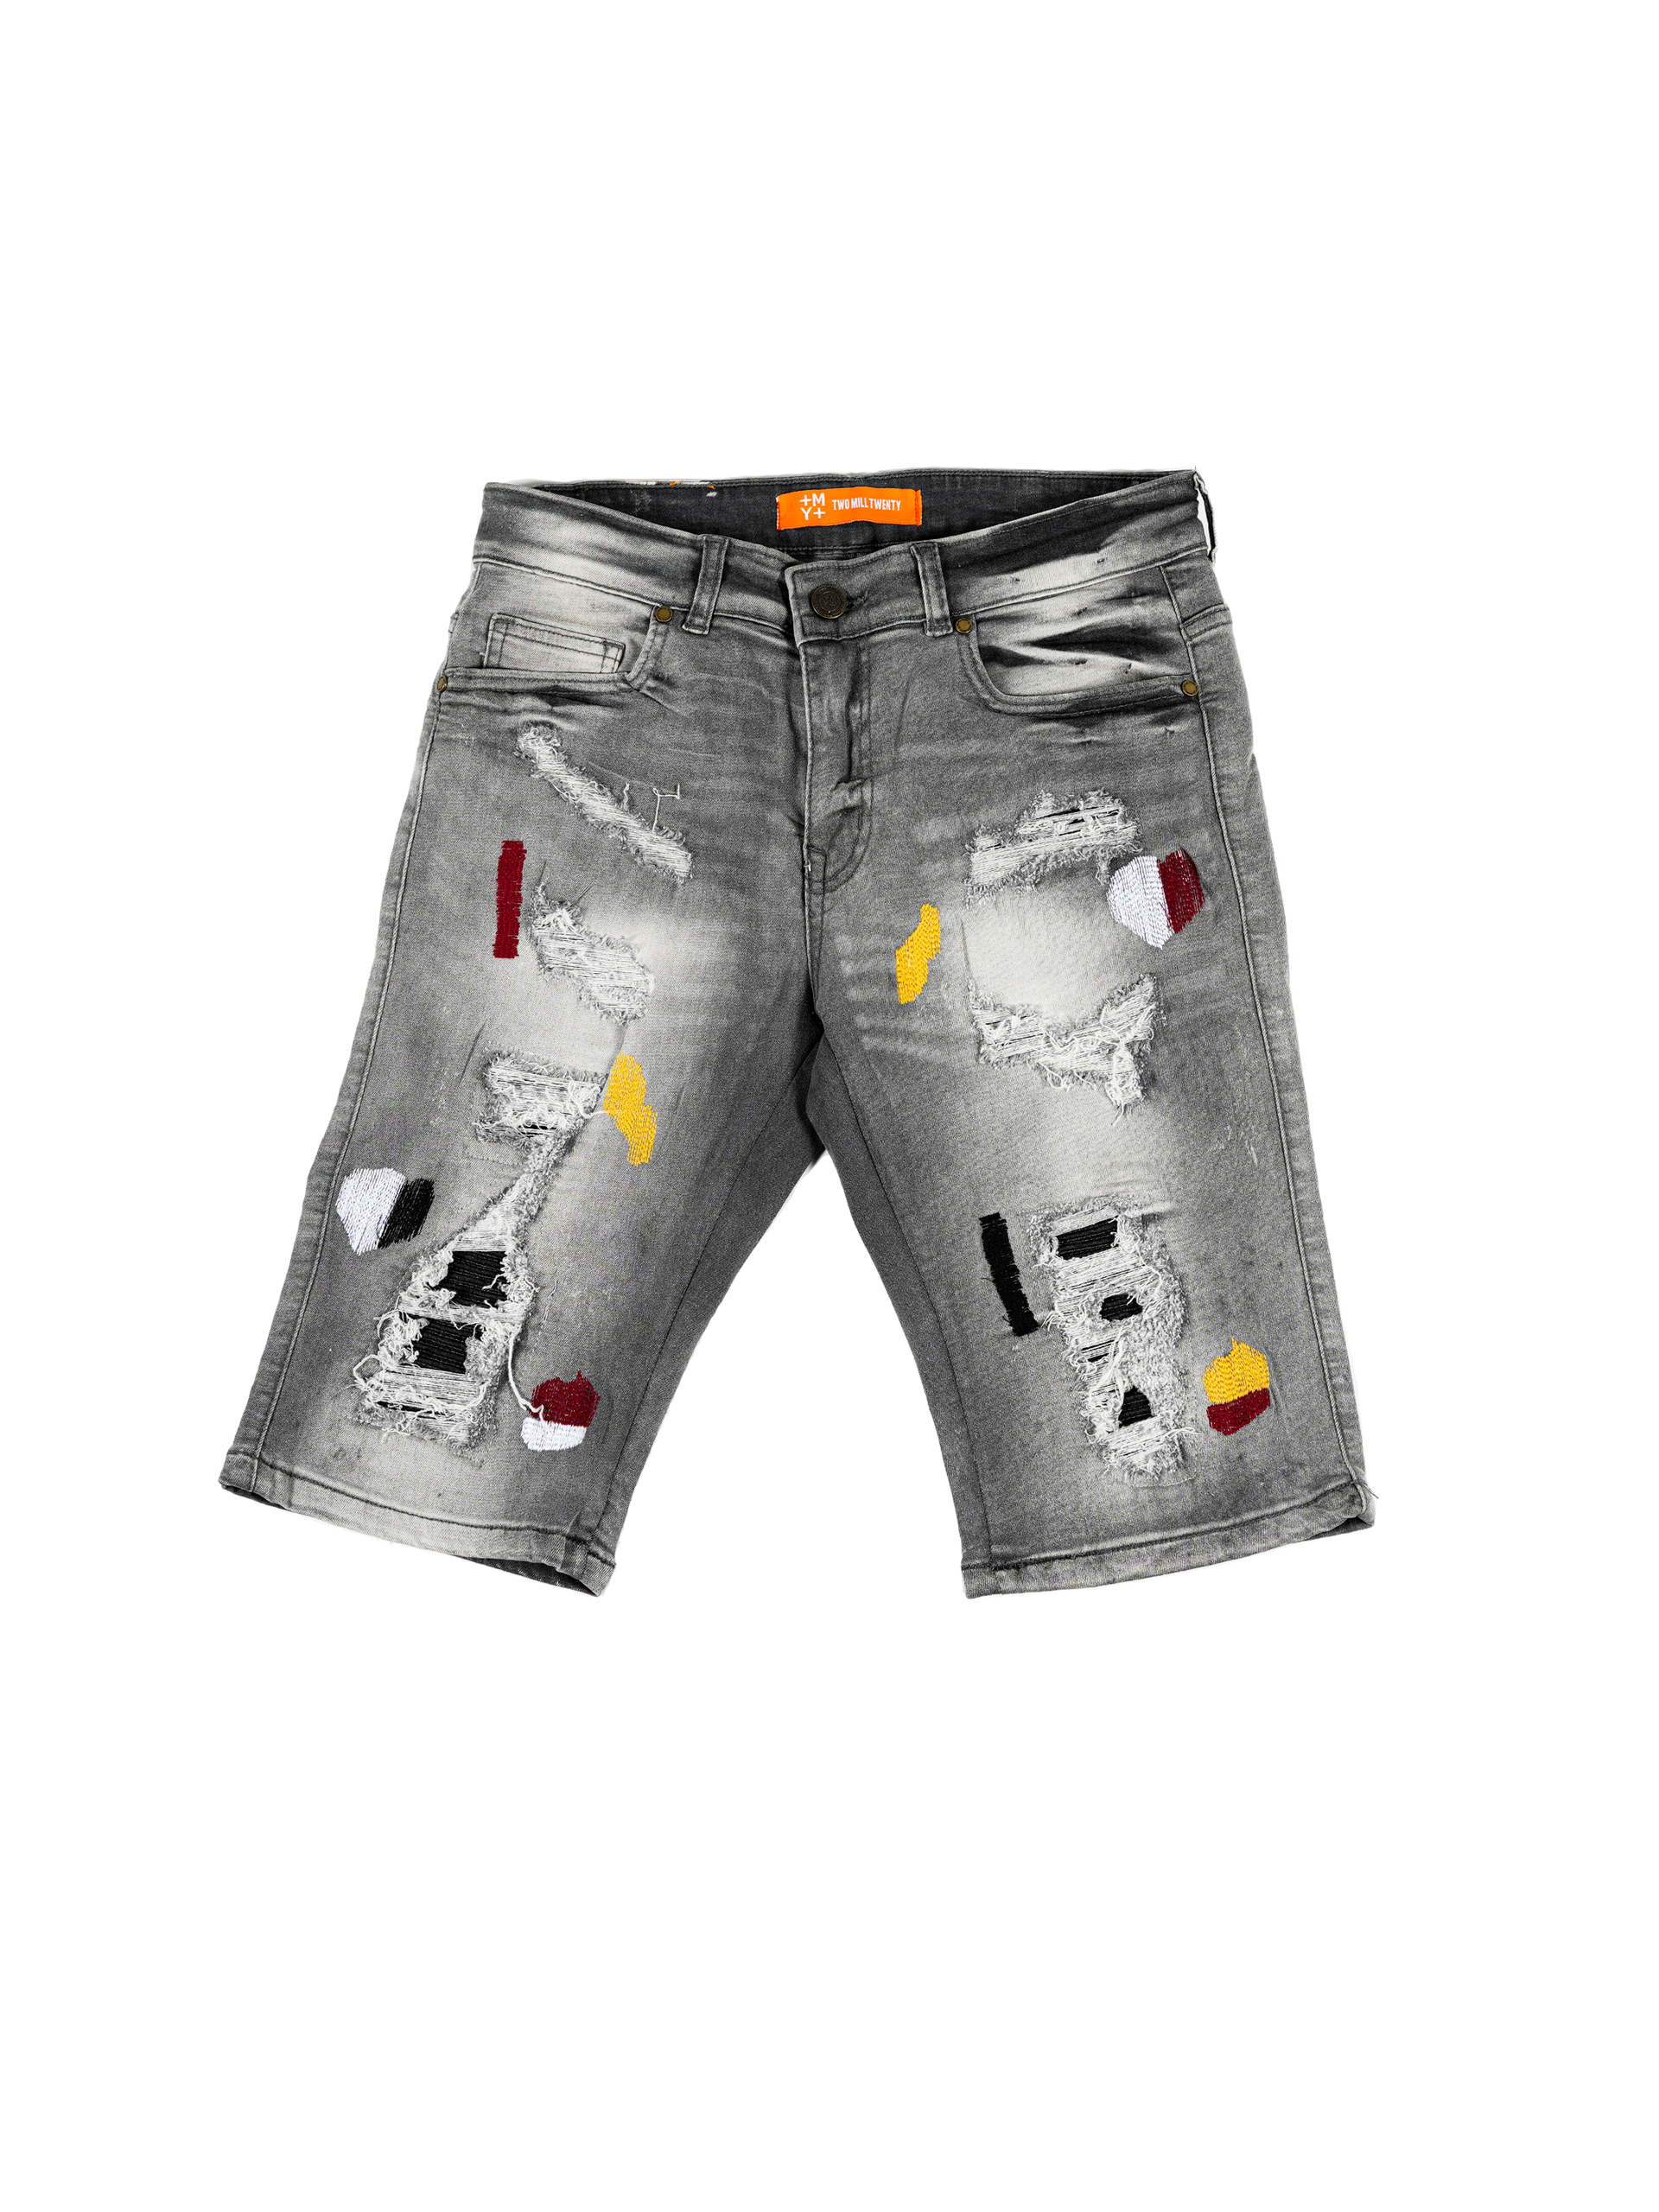 SUPERIOR | Men's Slim Fit Cutoff Knee Length Destroyed Ripped Patched Distressed Denim Jean Shorts in Grey Stone